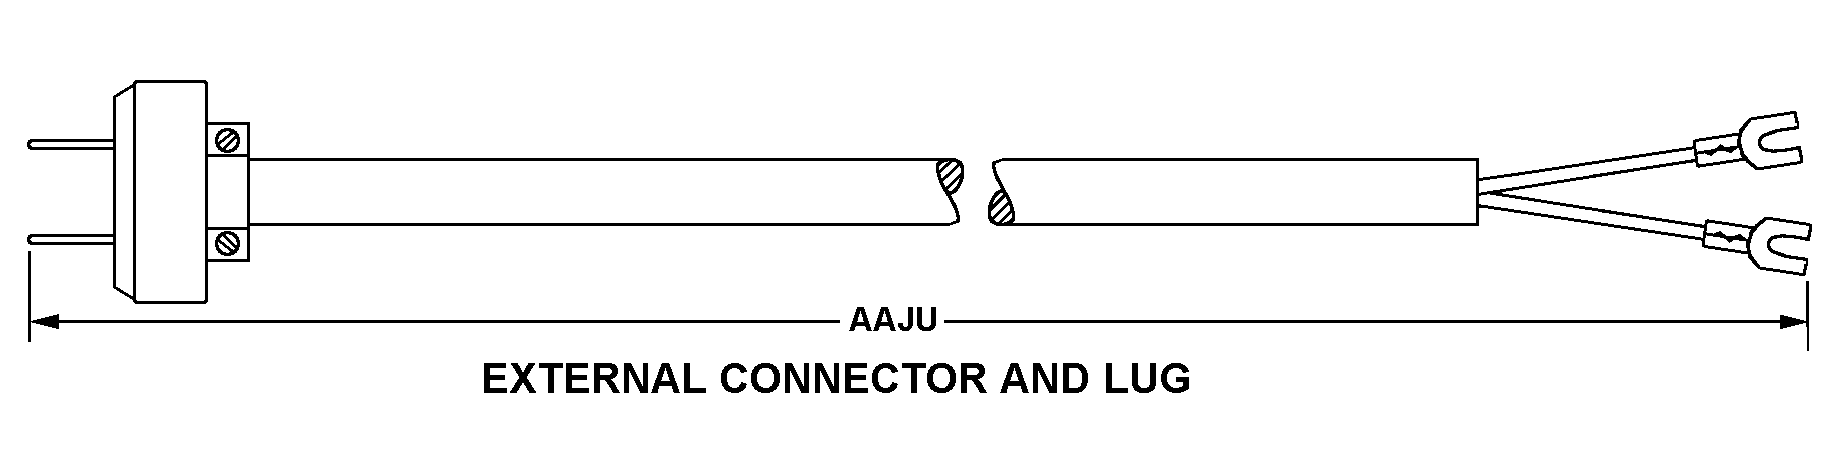 EXTERNAL CONNECTOR AND LUG style nsn 5995-01-121-7678